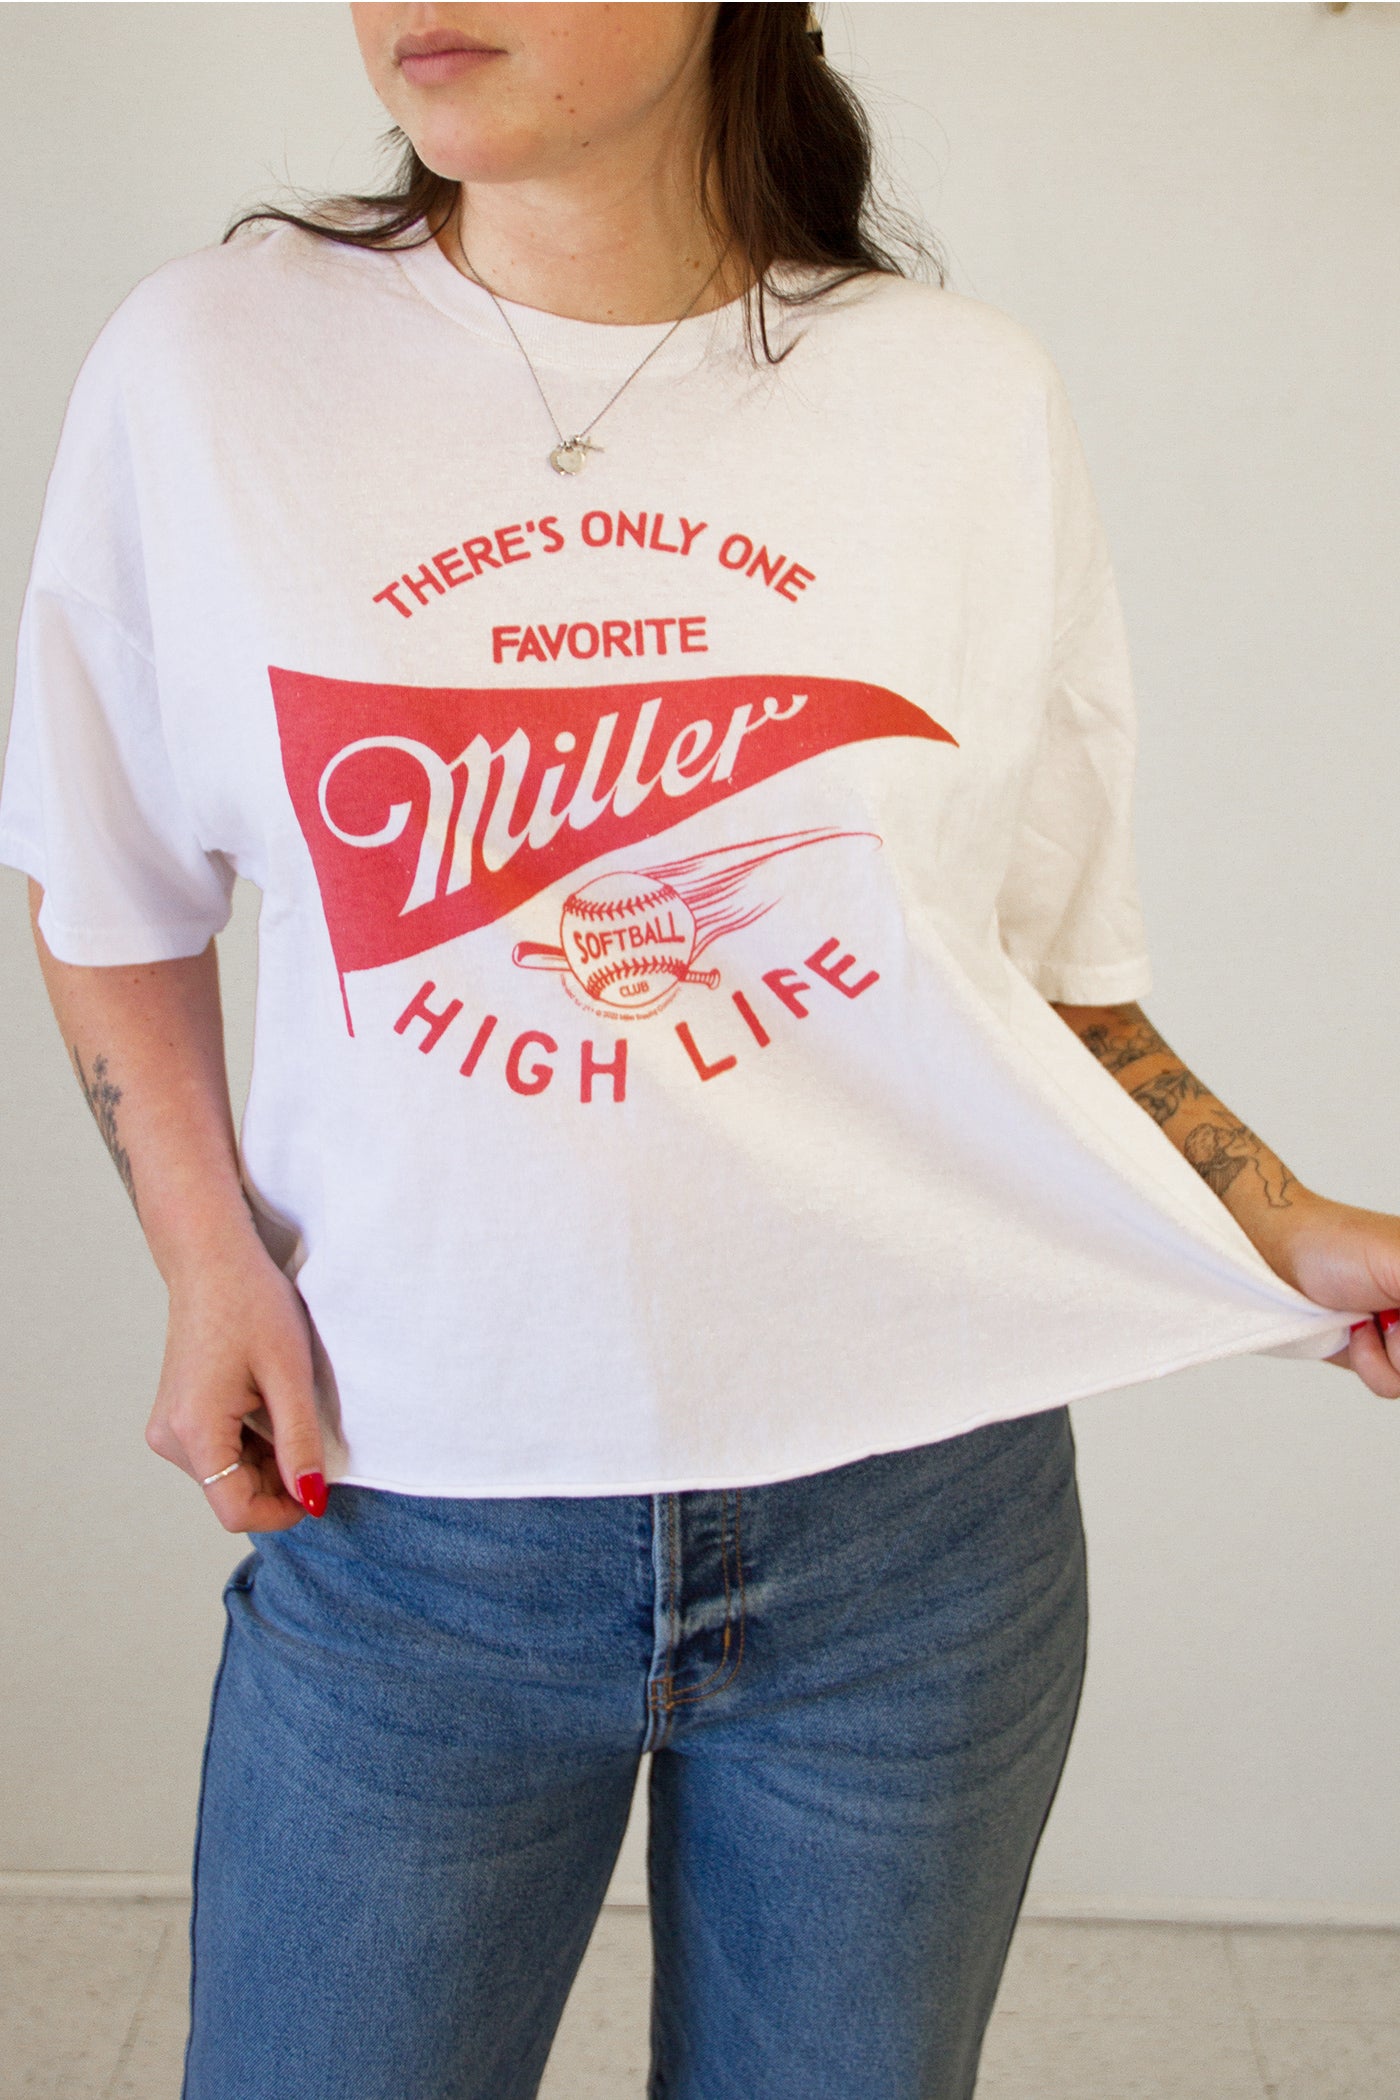 Miller High Life Softball Graphic Tee by Junk Food Clothing